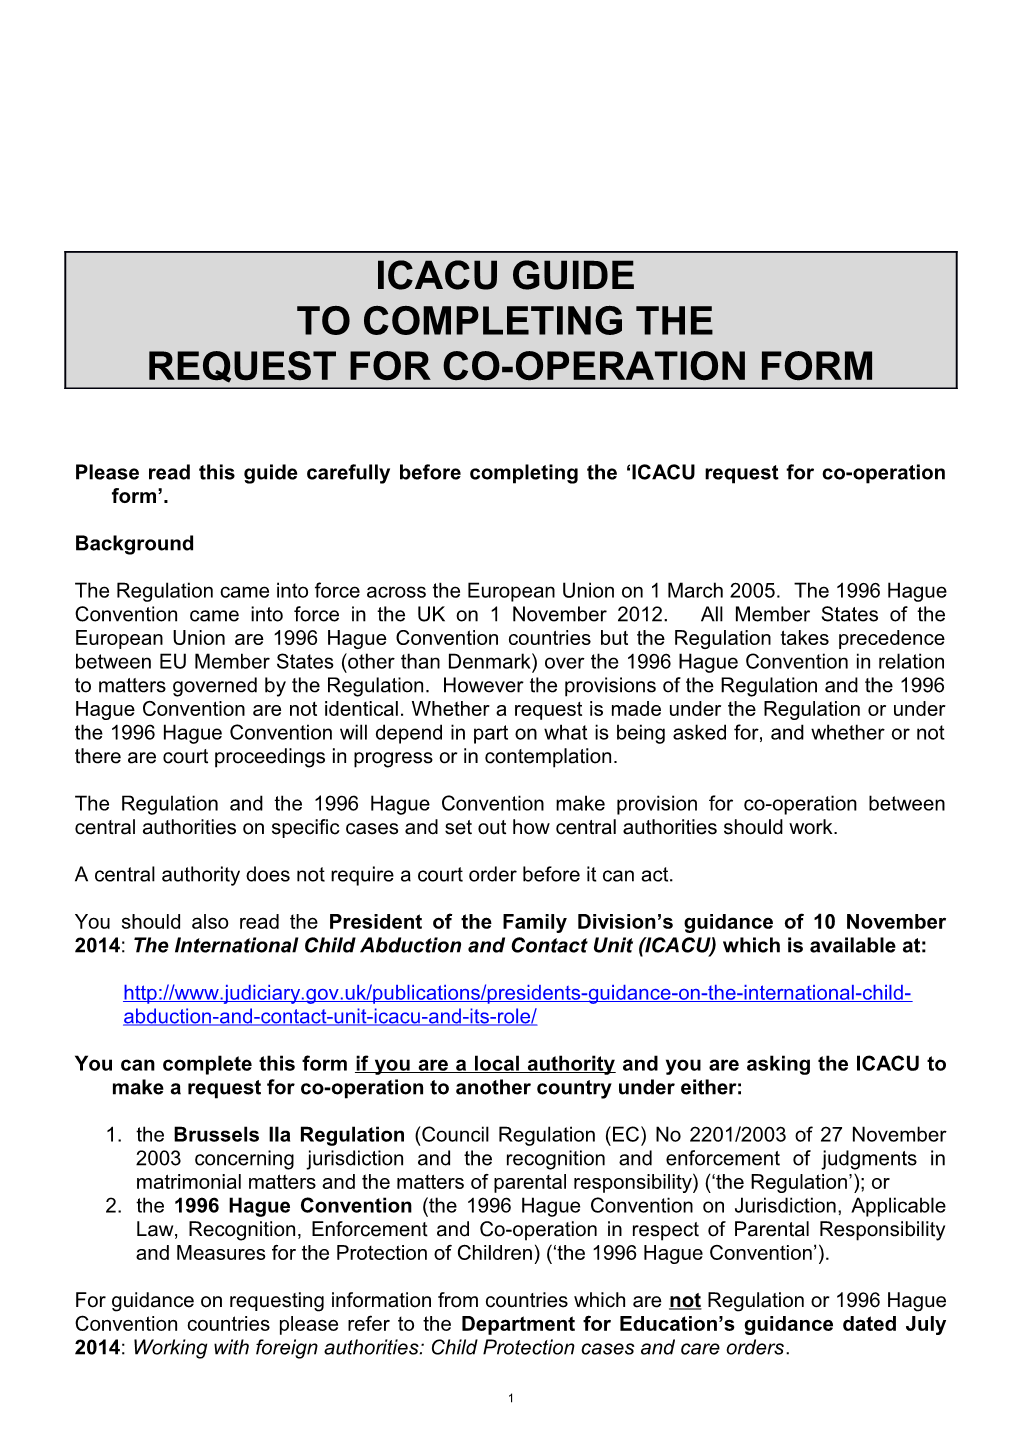 Please Read This Guide Carefully Before Completing the ICACU Request for Co-Operation Form